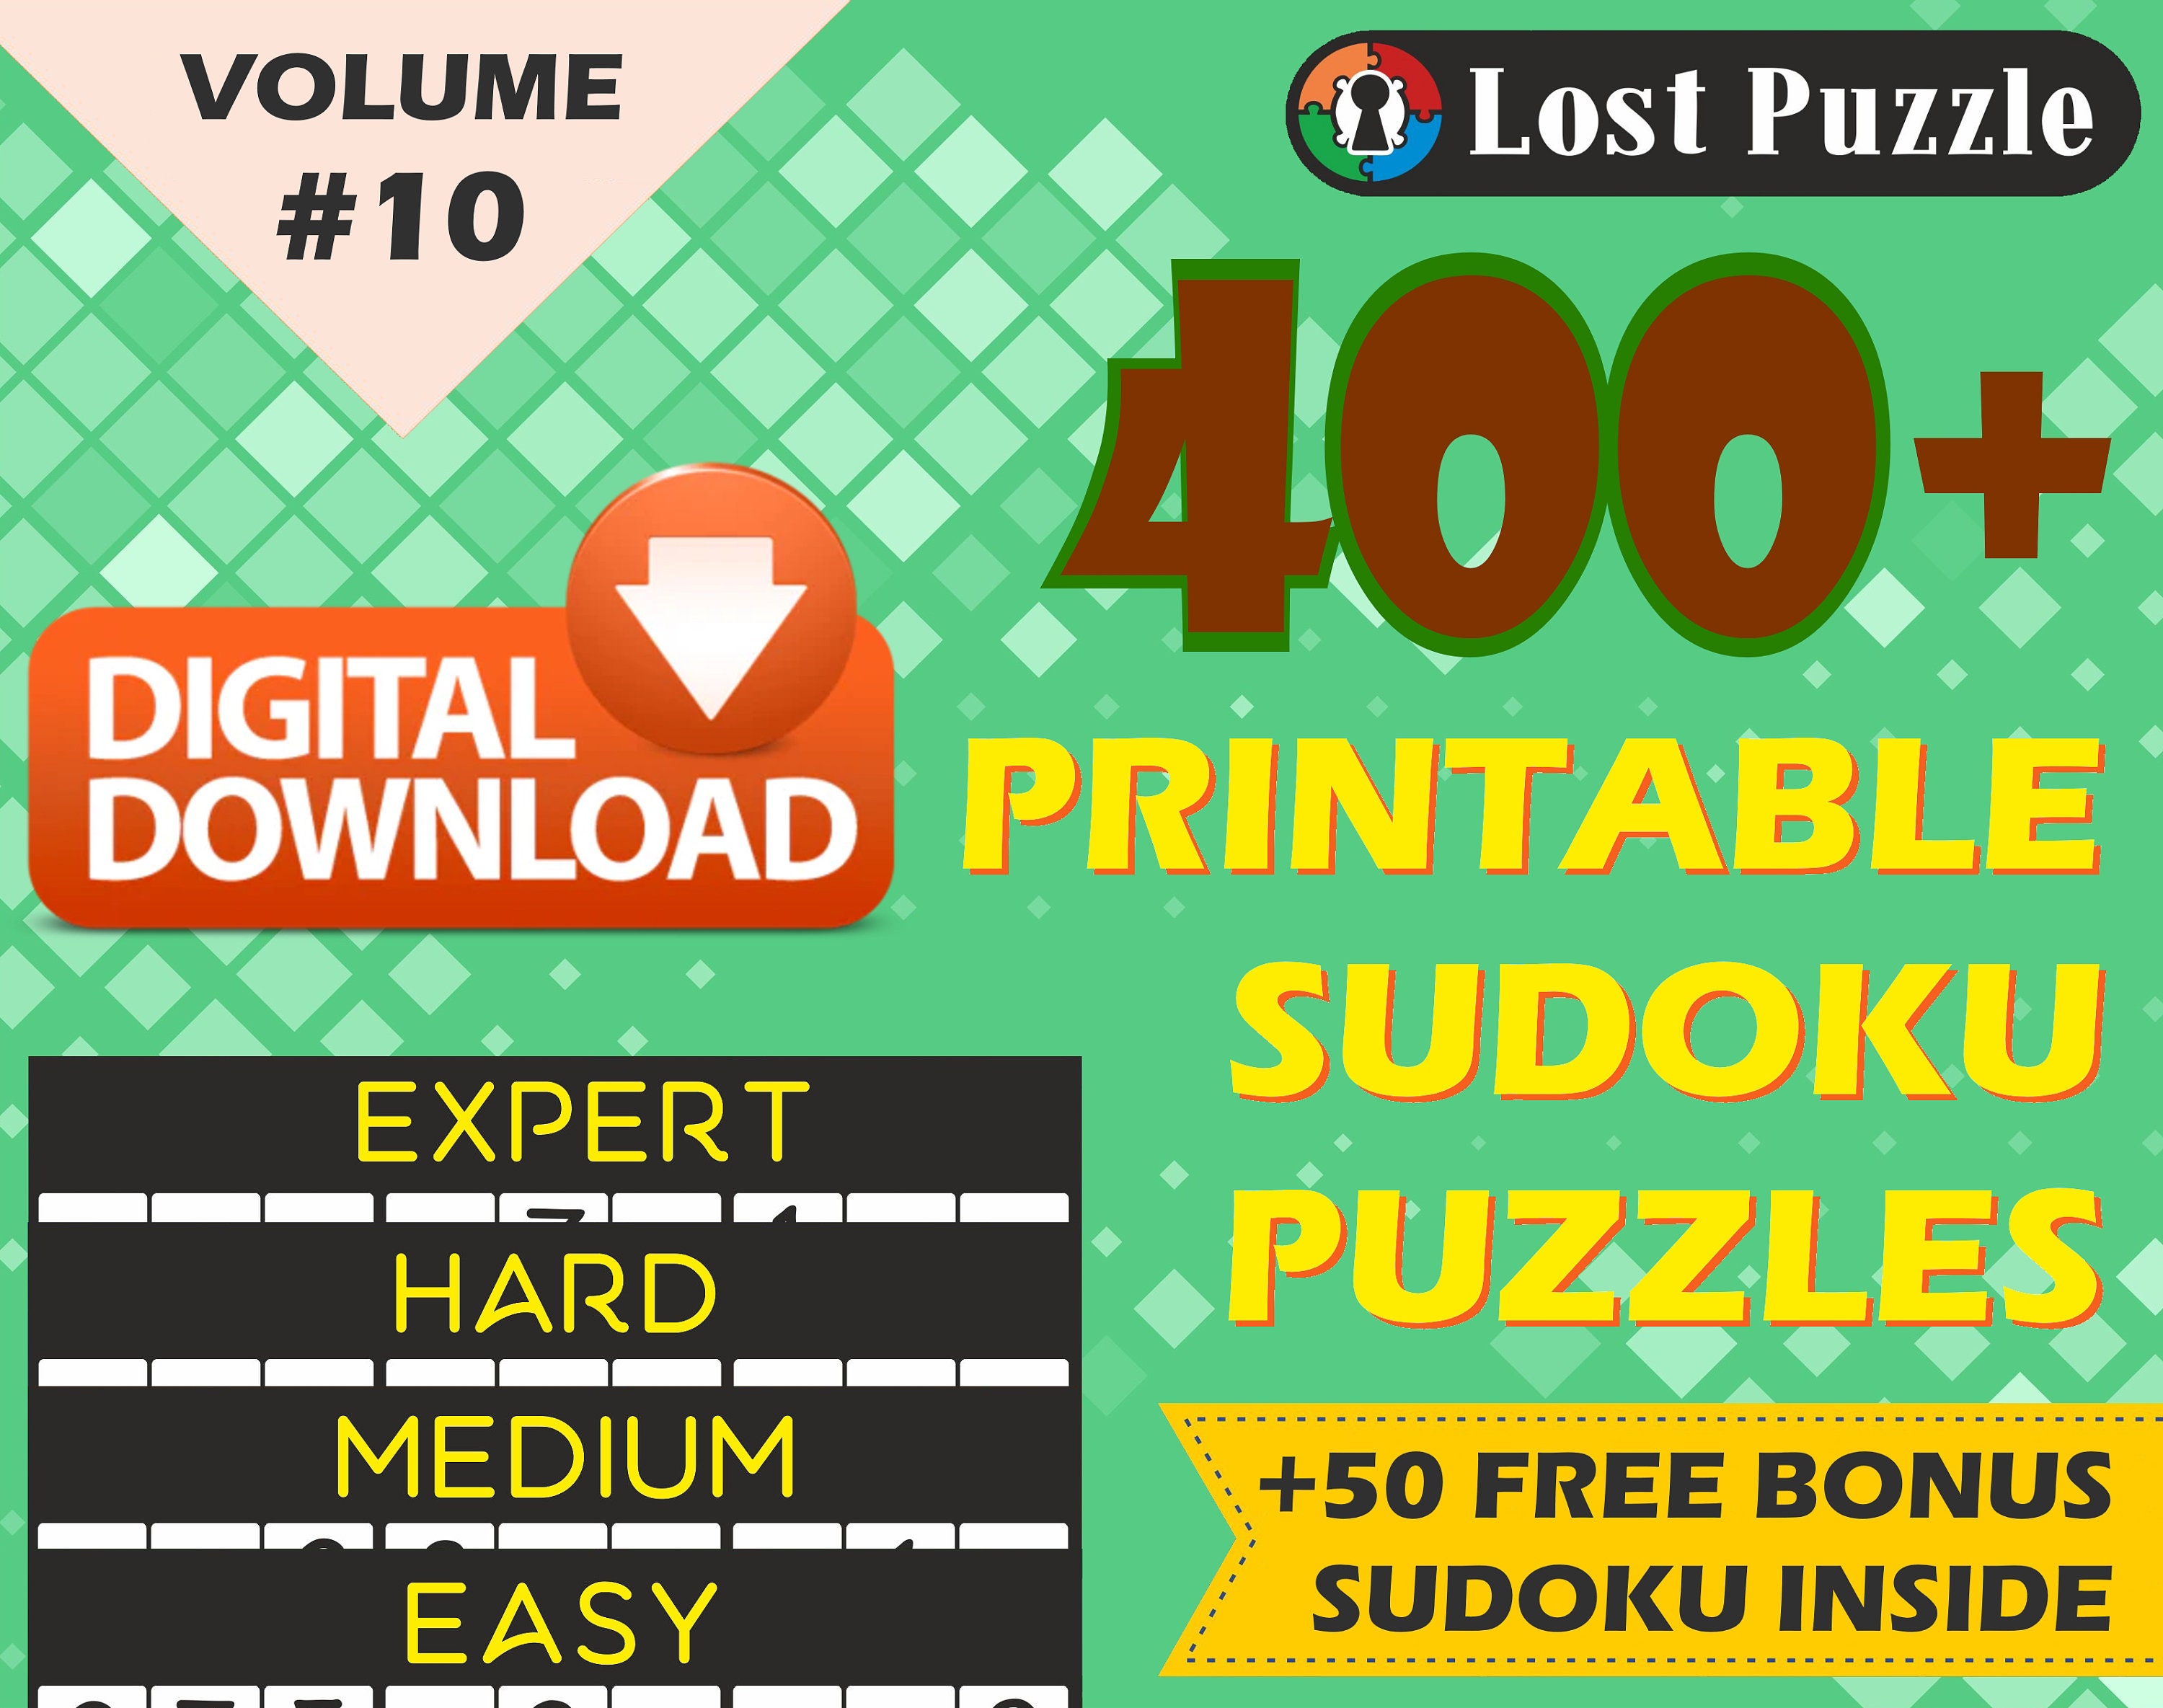 Printable Sudoku - 100+ Puzzles From Easy To Hard - World of Printables